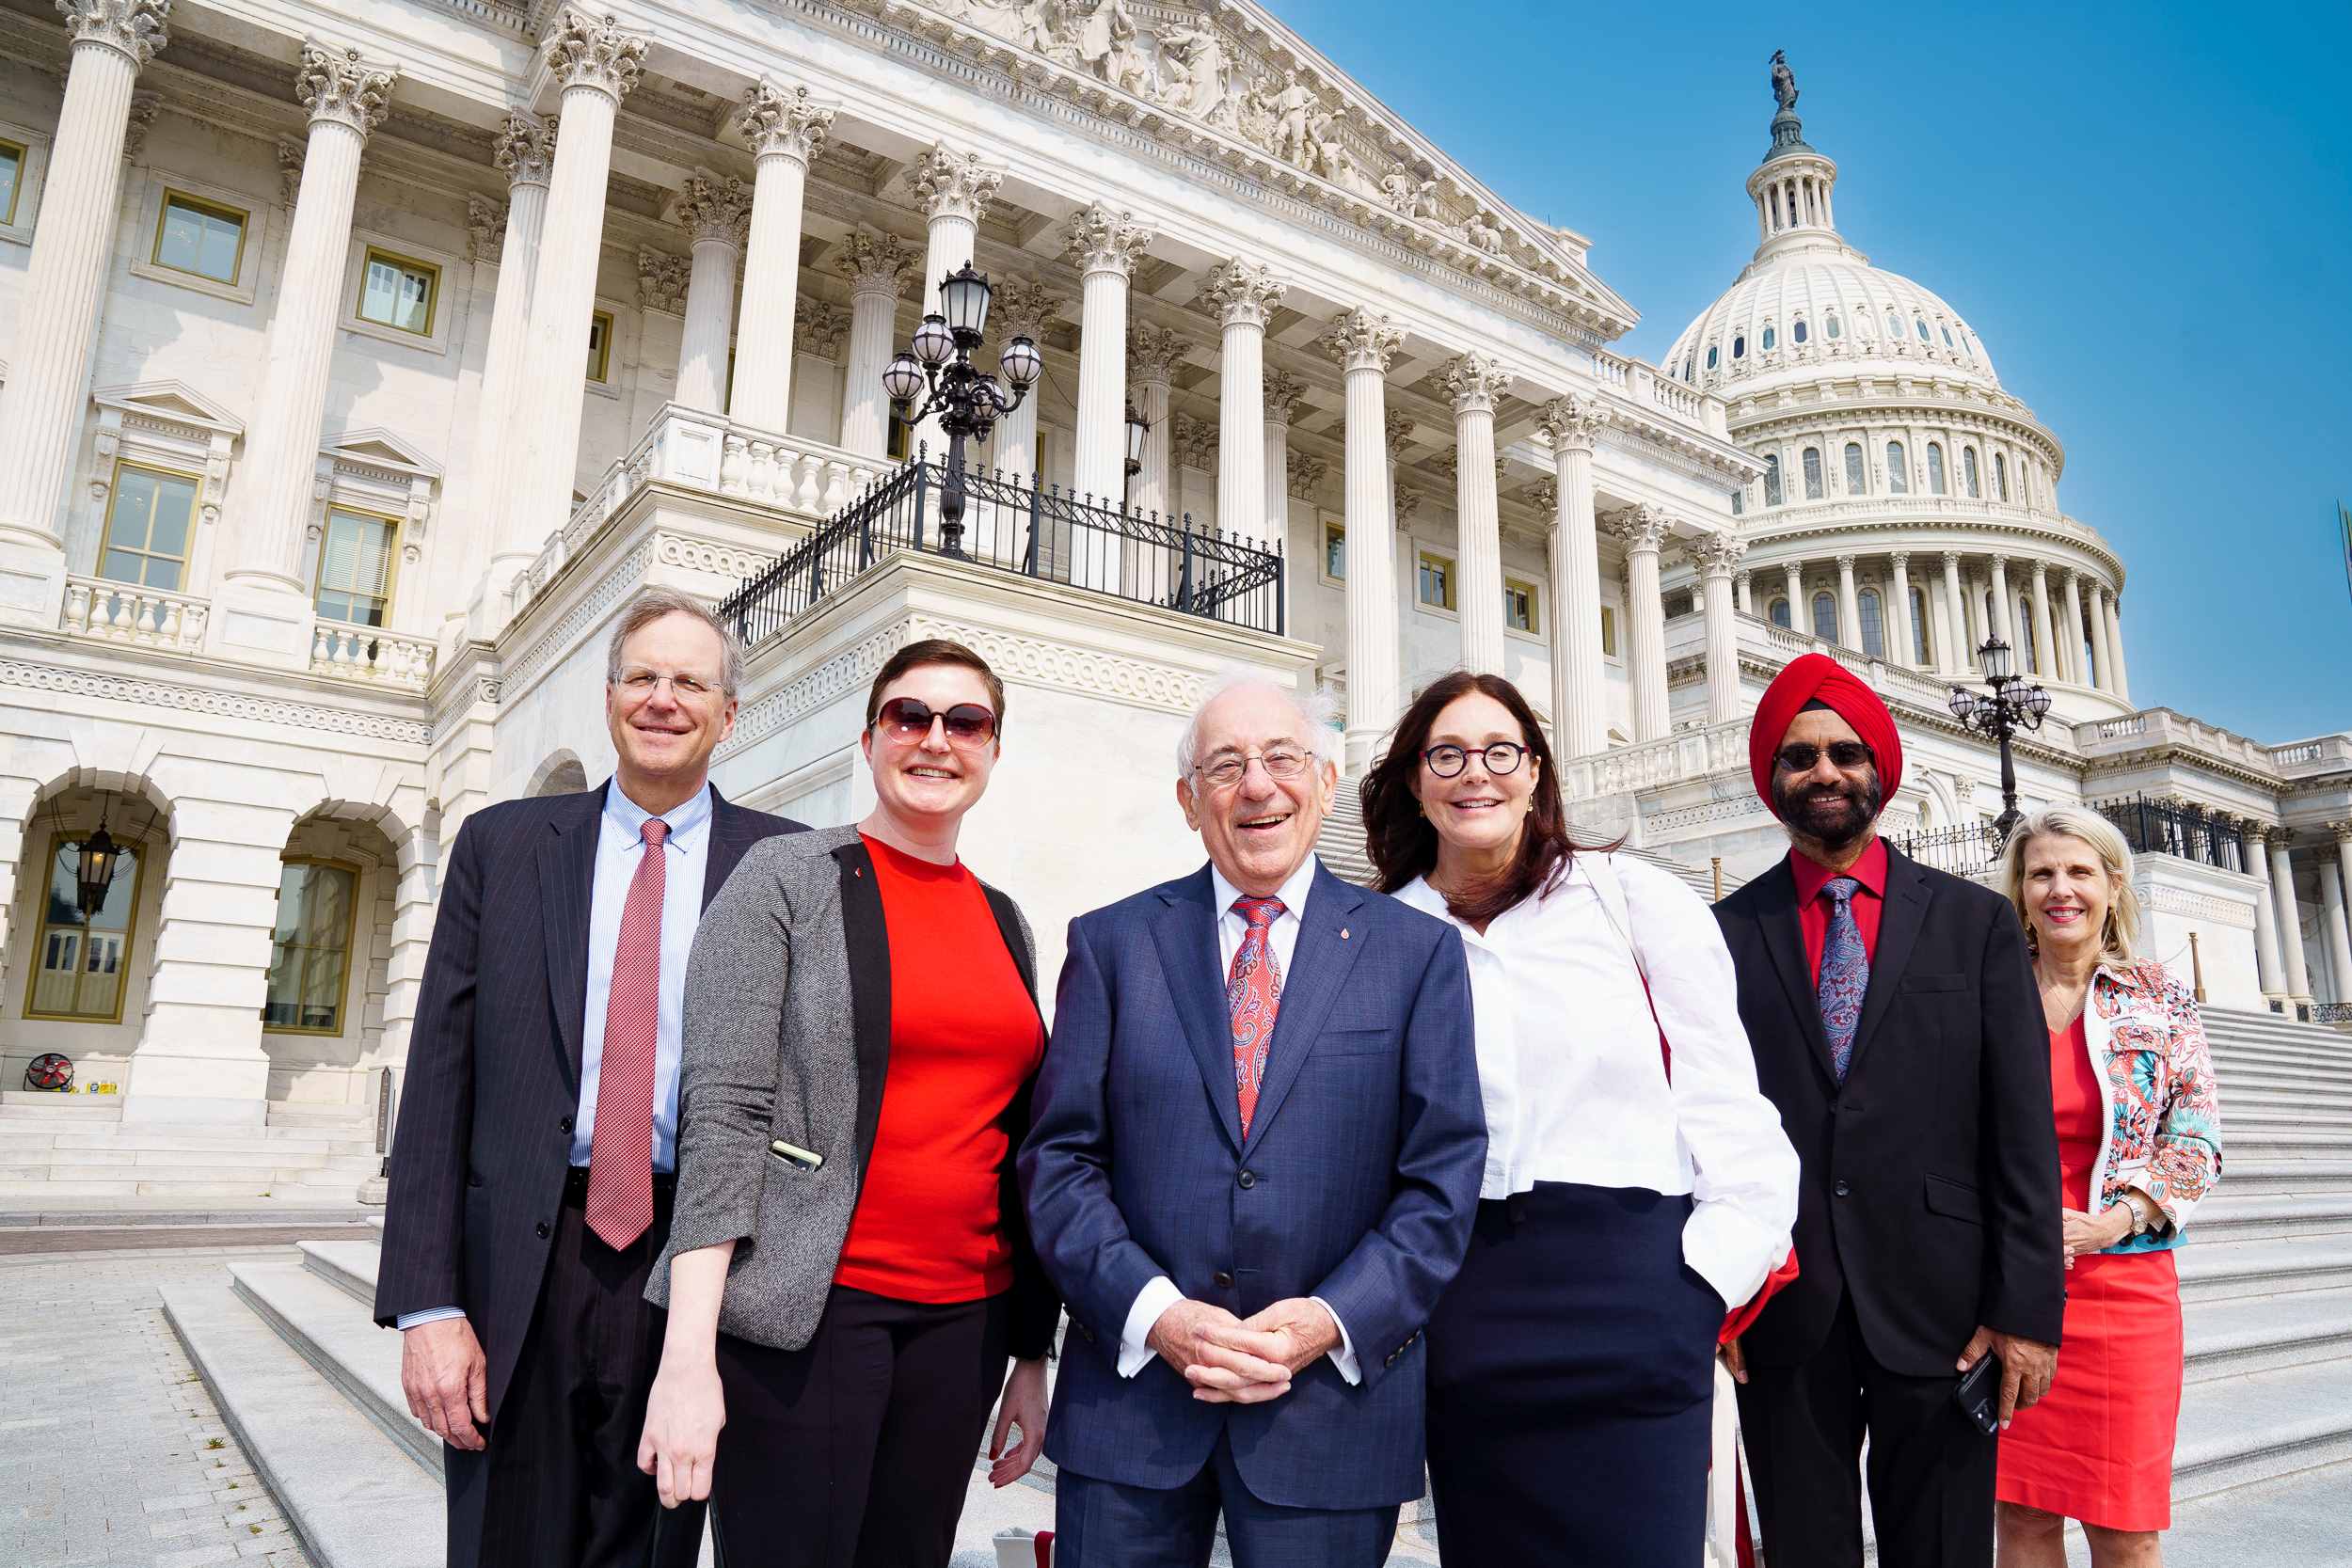 Advocates and LLS staff stand in front of the capitol in Washington, D.C.